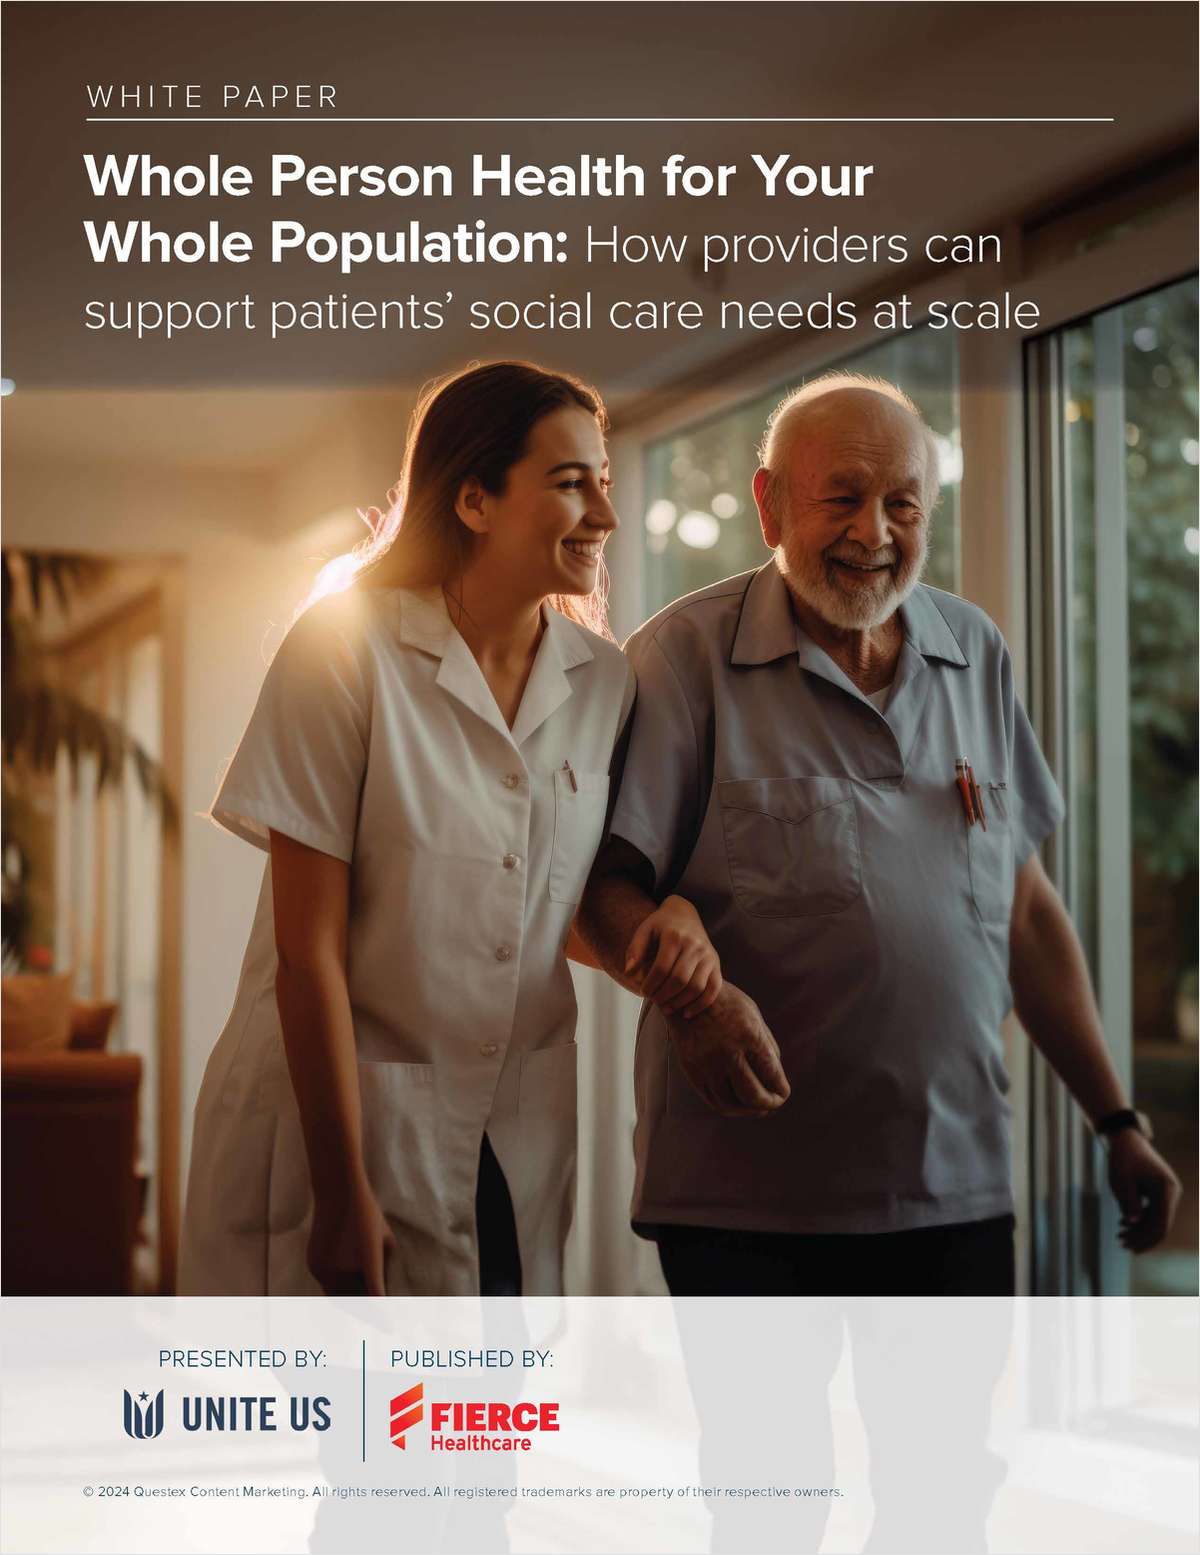 Whole Person Health for Your Whole Population: How providers can support patients' social care needs at scale